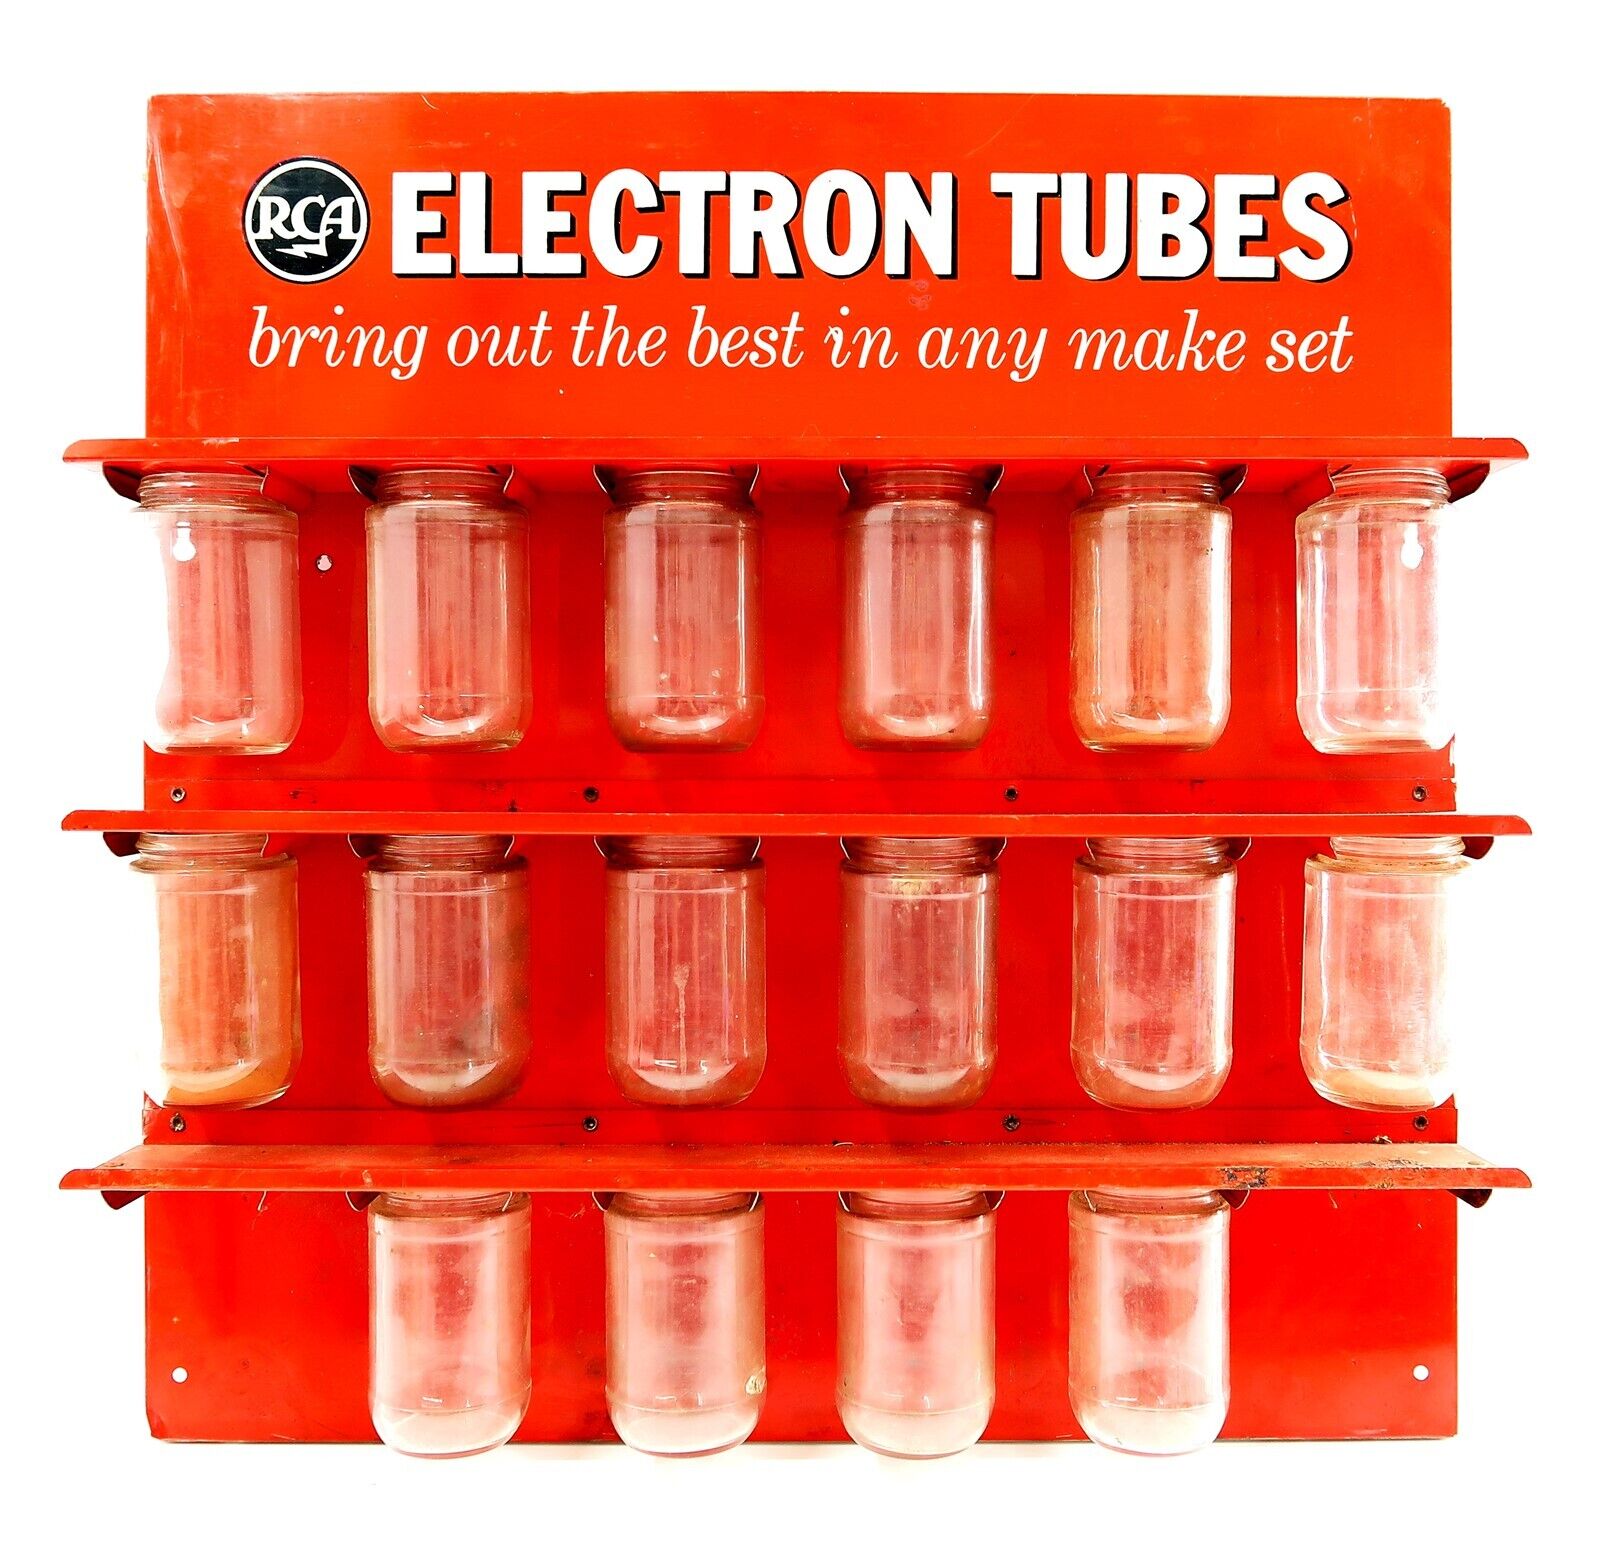 Vintage 1950\'s RCA ELECTRON TUBES Advertising Sign Display Rack with Glass Jars